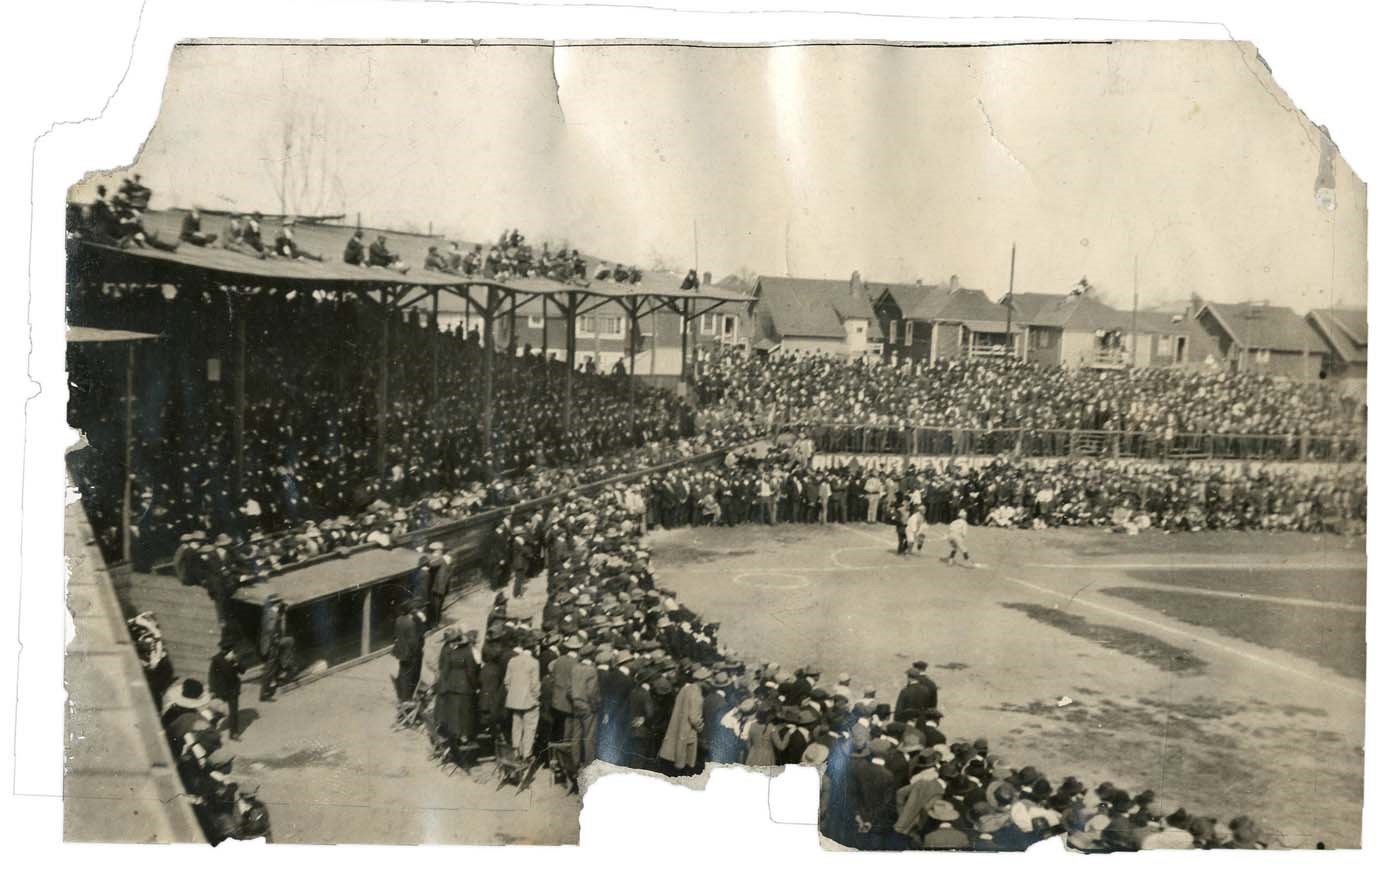 - Early 1920s Chicago American Giants at Southside Park Action Photograph (ex-Rube Foster Family)